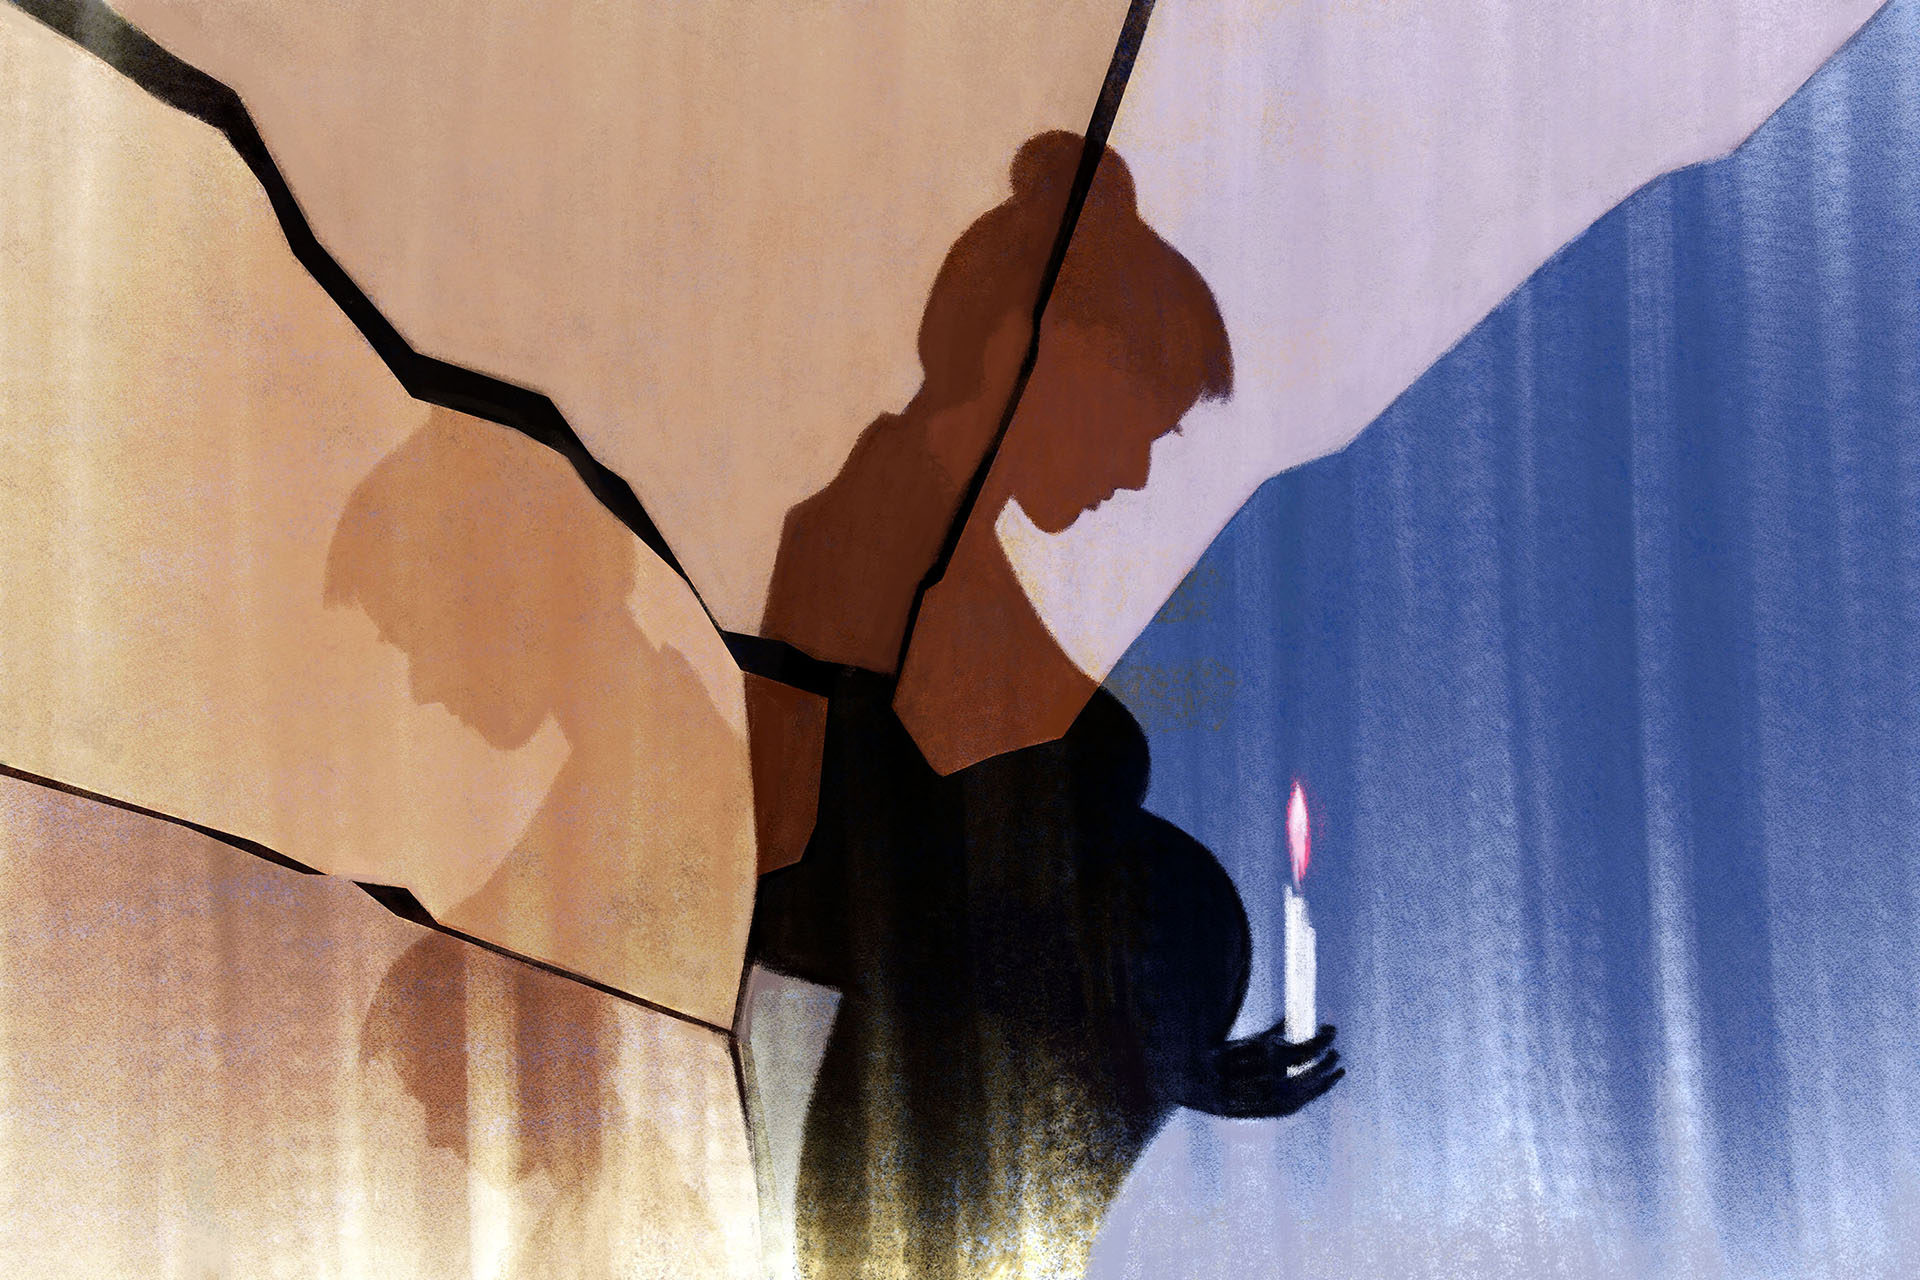 An illustration of a pregnant person holding a candle